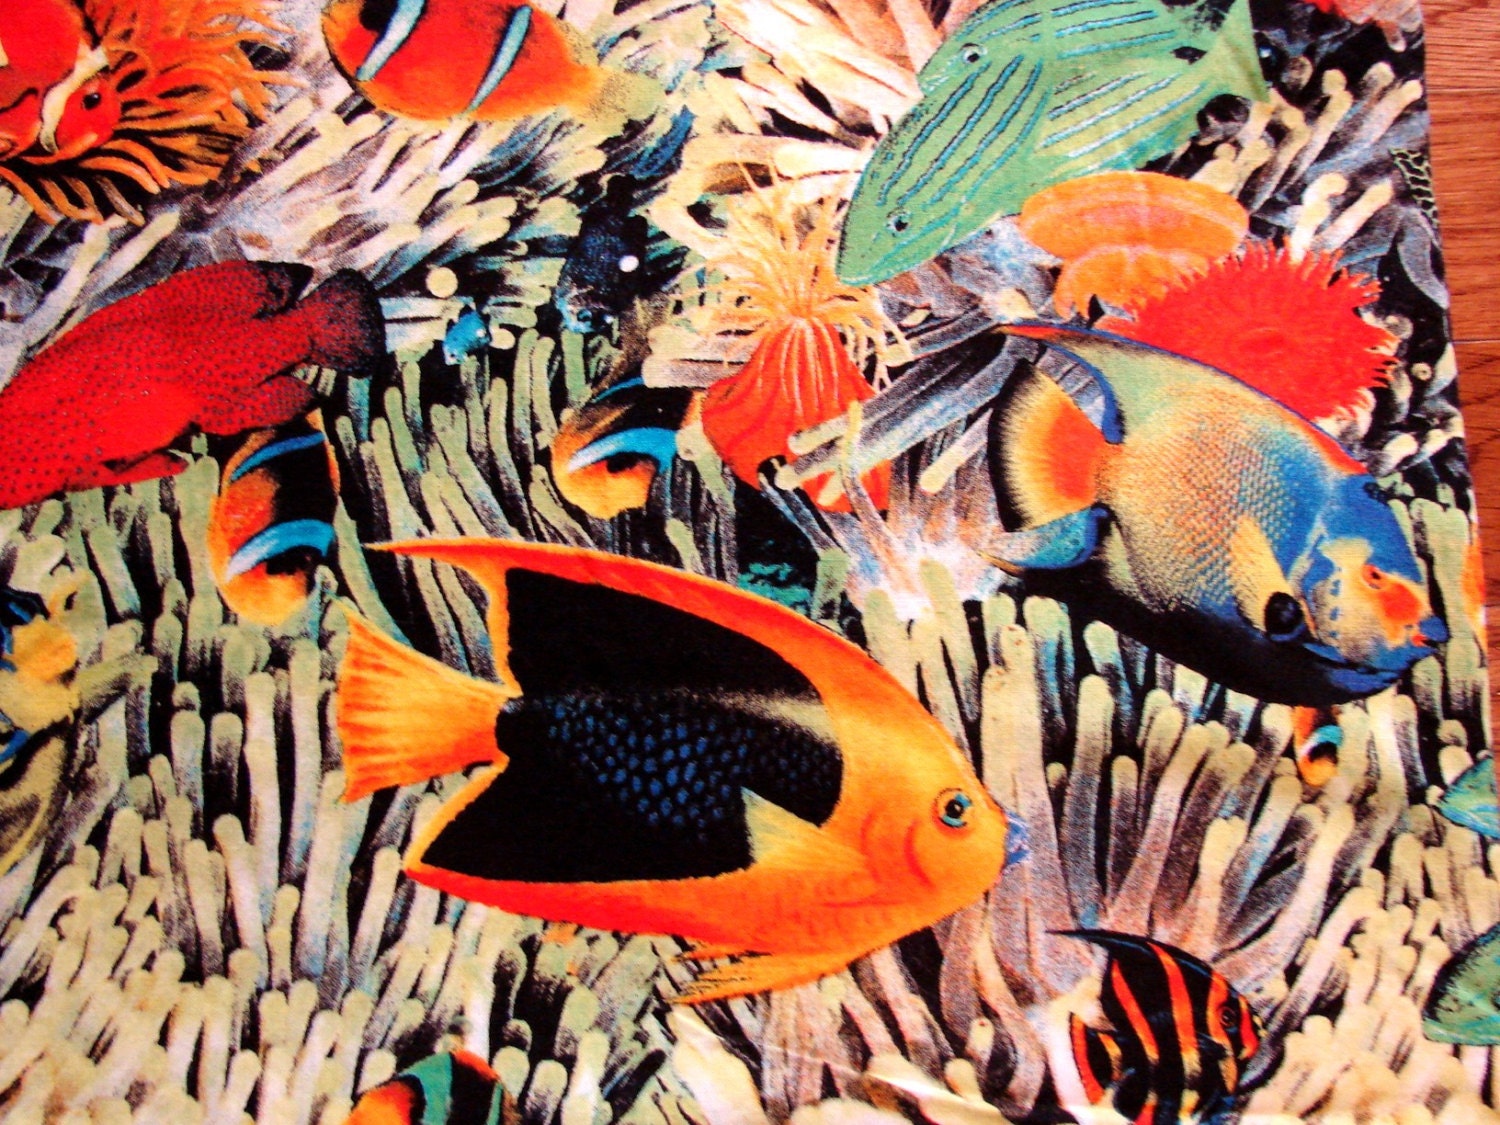 Tropical Fish Fabric Cotton Sewing Fabric 1.5 yards